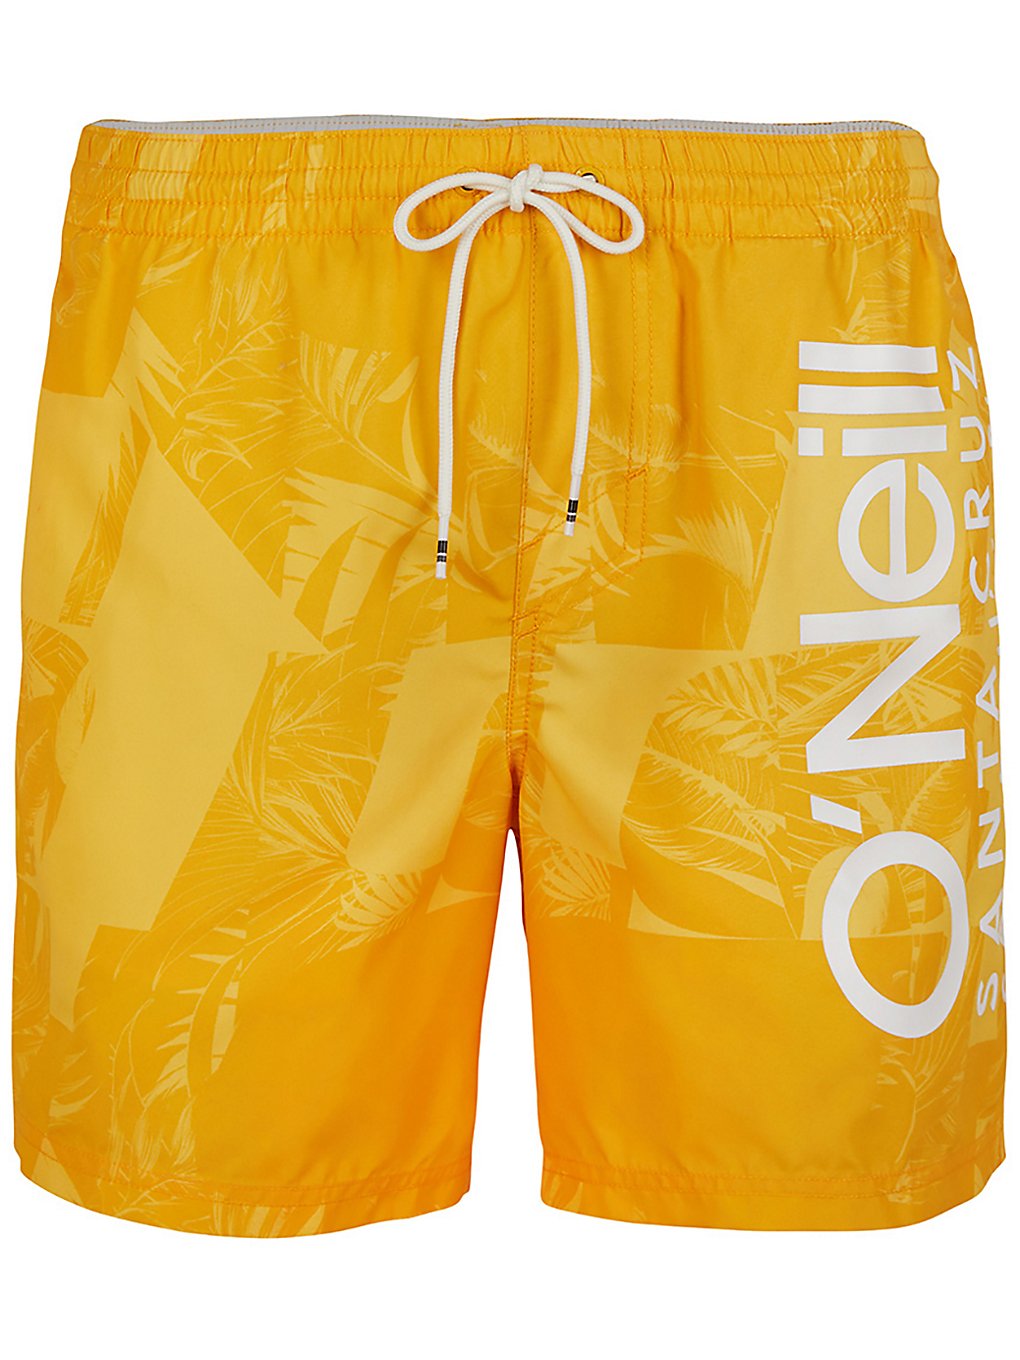 O'Neill Cali Floral 2 Boardshorts yellow aop